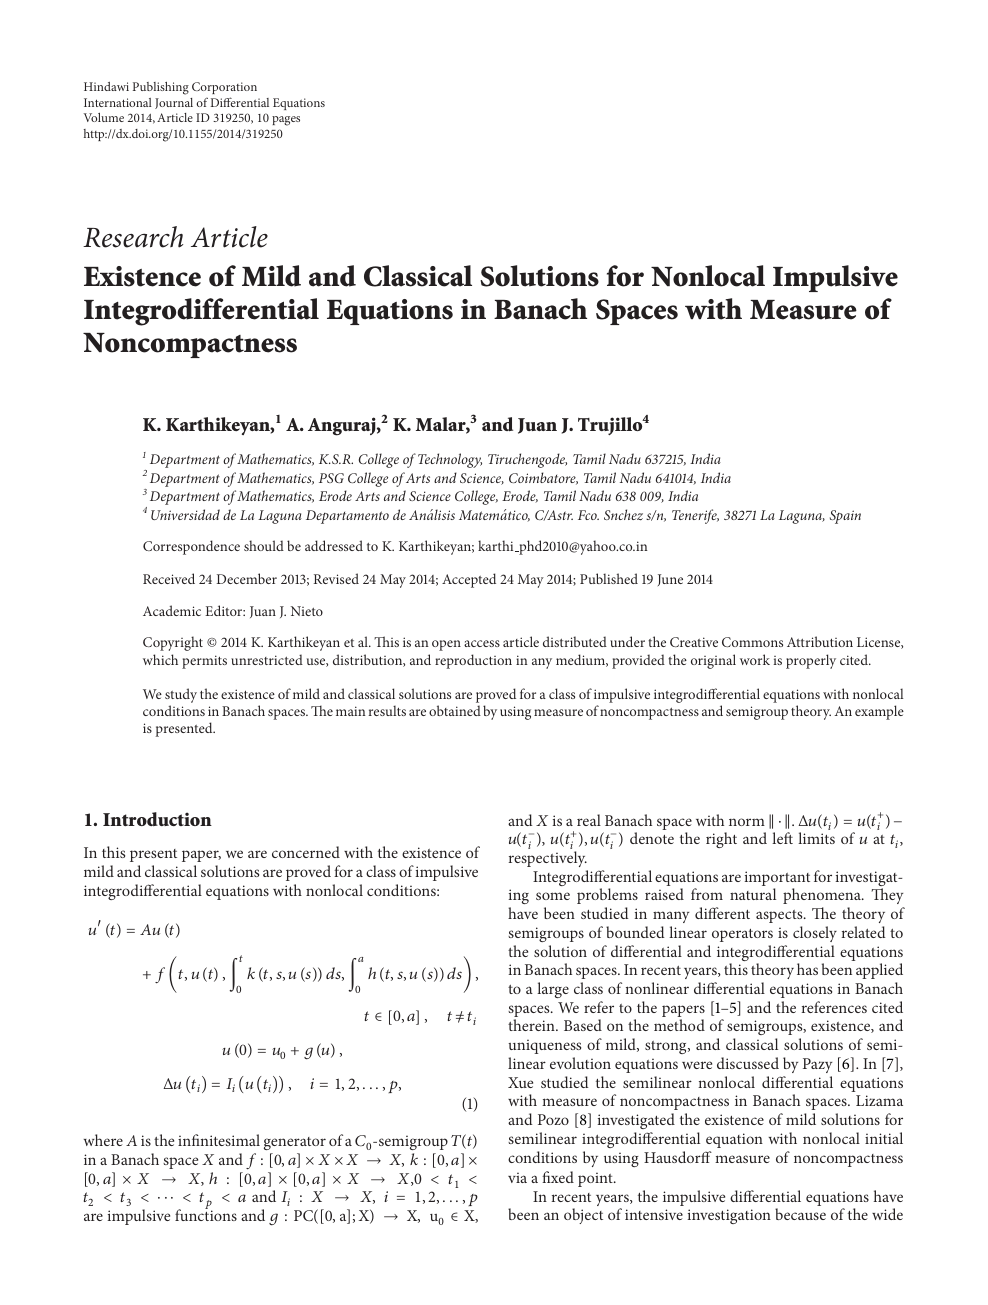 Existence Of Mild And Classical Solutions For Nonlocal Impulsive Integrodifferential Equations In Banach Spaces With Measure Of Noncompactness Topic Of Research Paper In Mathematics Download Scholarly Article Pdf And Read For